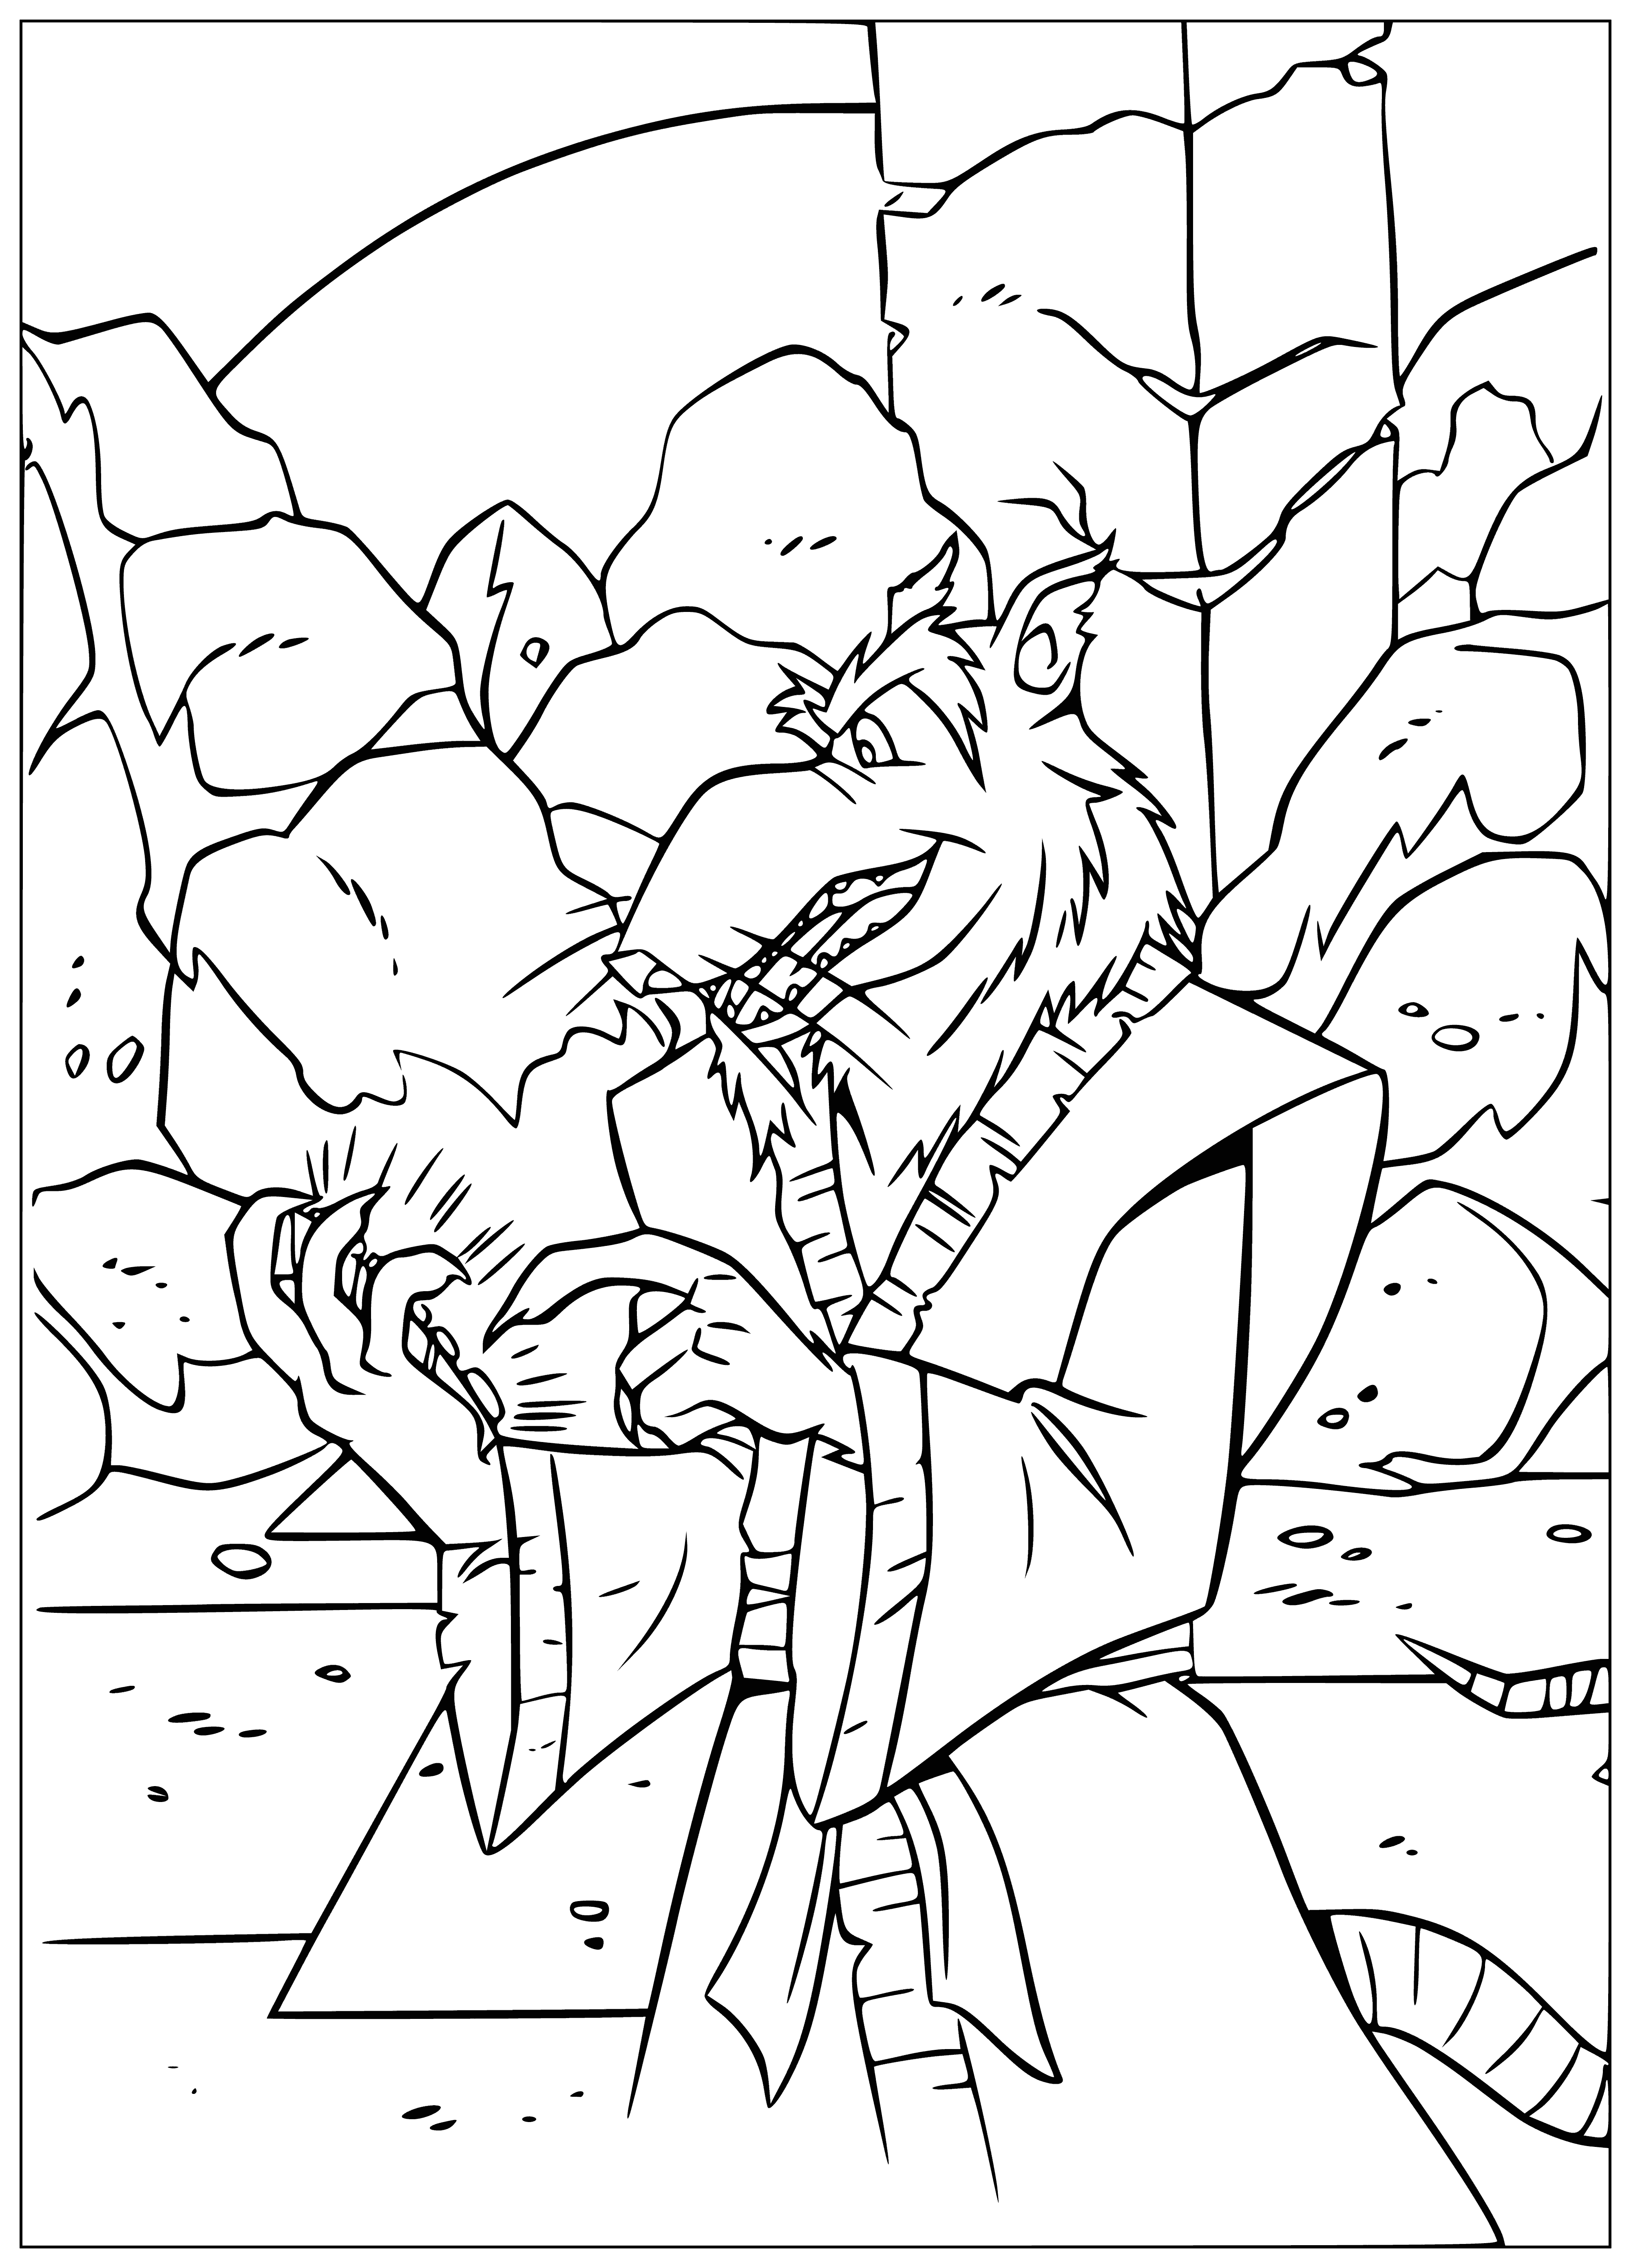 coloring page: Rat Splinter is Sensei to the Ninja Turtles, and their father, teaching them martial arts and life skills.